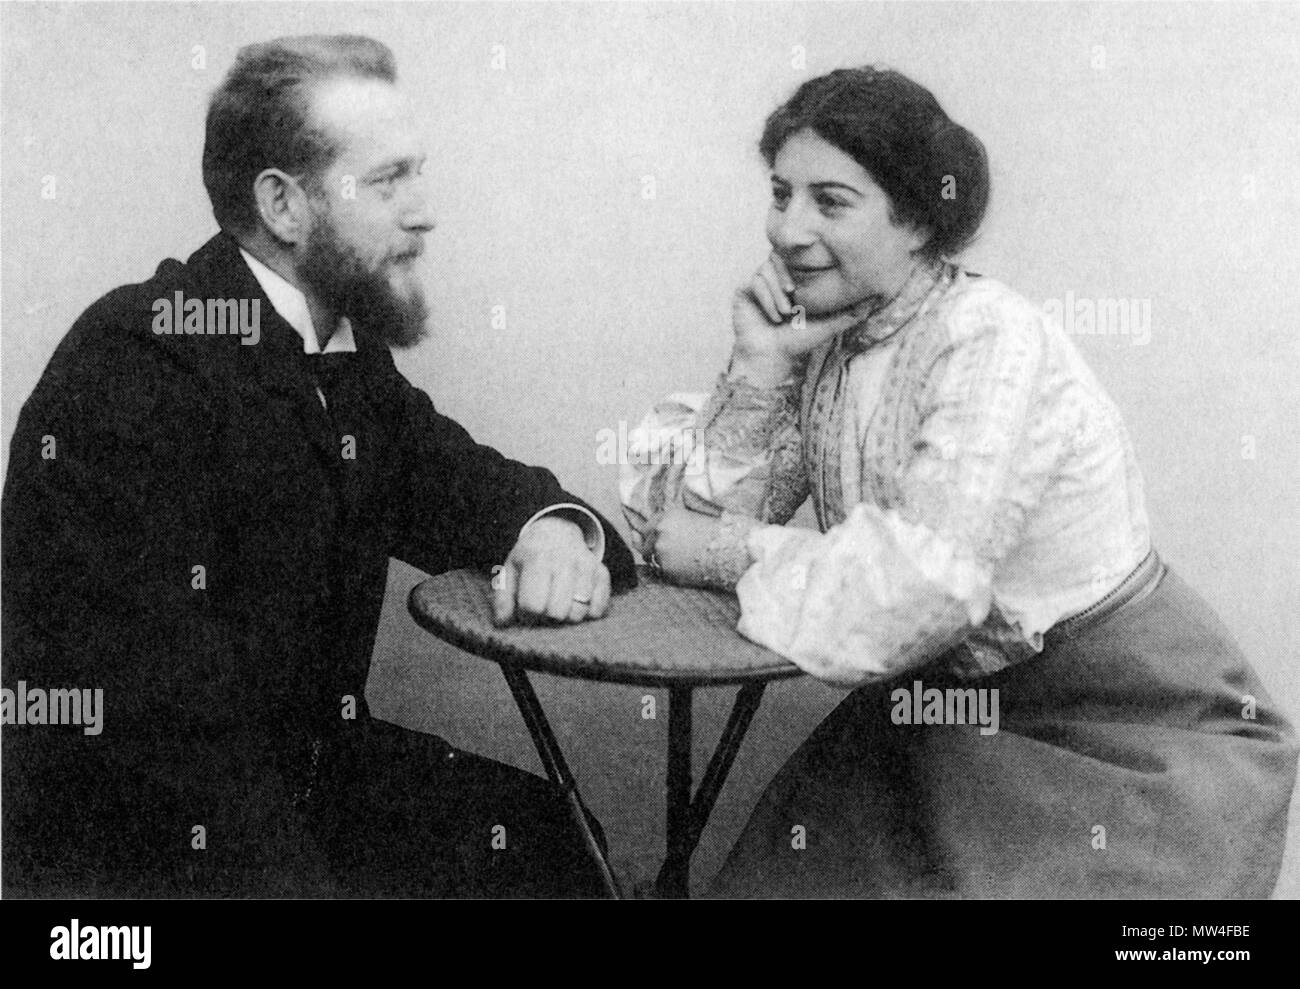 . English: Photograph of Otrto Magnus and his wife Traudl about 1905 . 15 November 2012, 13:37:35. Unknown 530 Rudolf and Traudl Stock Photo